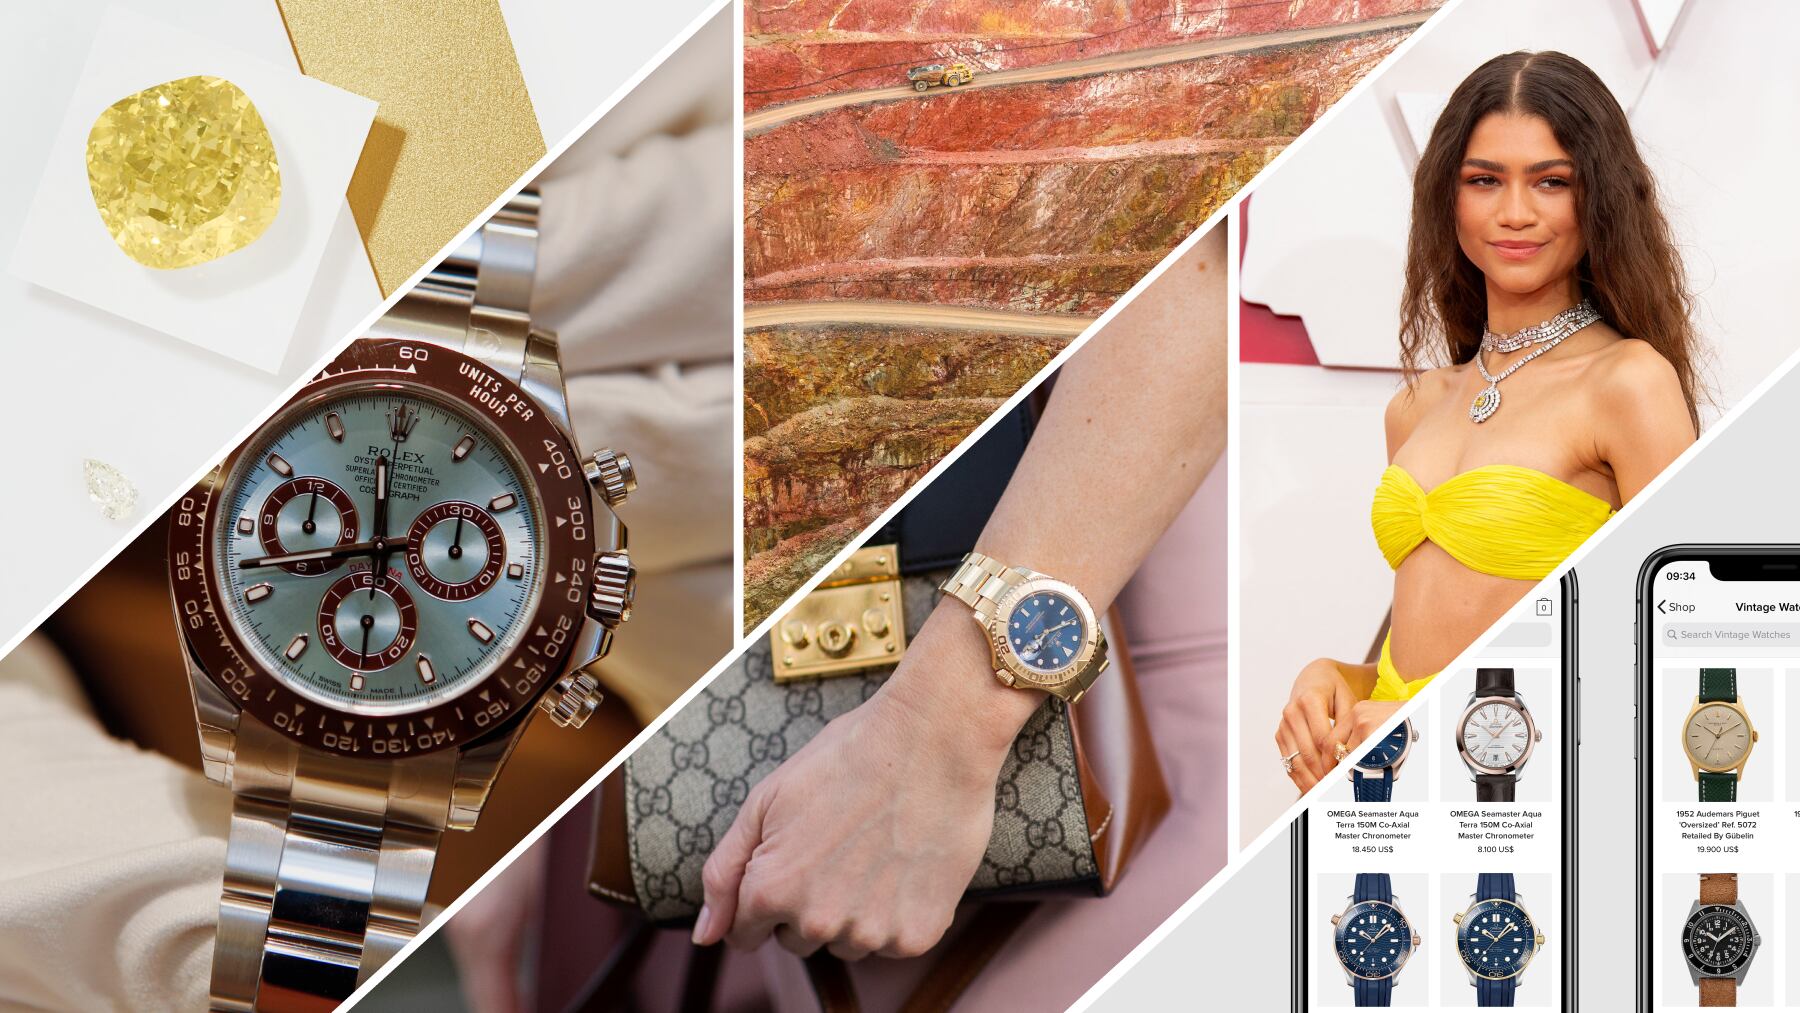 Despite double-digit revenue declines during the pandemic, there are new opportunities for growth in both the fine jewellery and watch industries. BoF Collage.